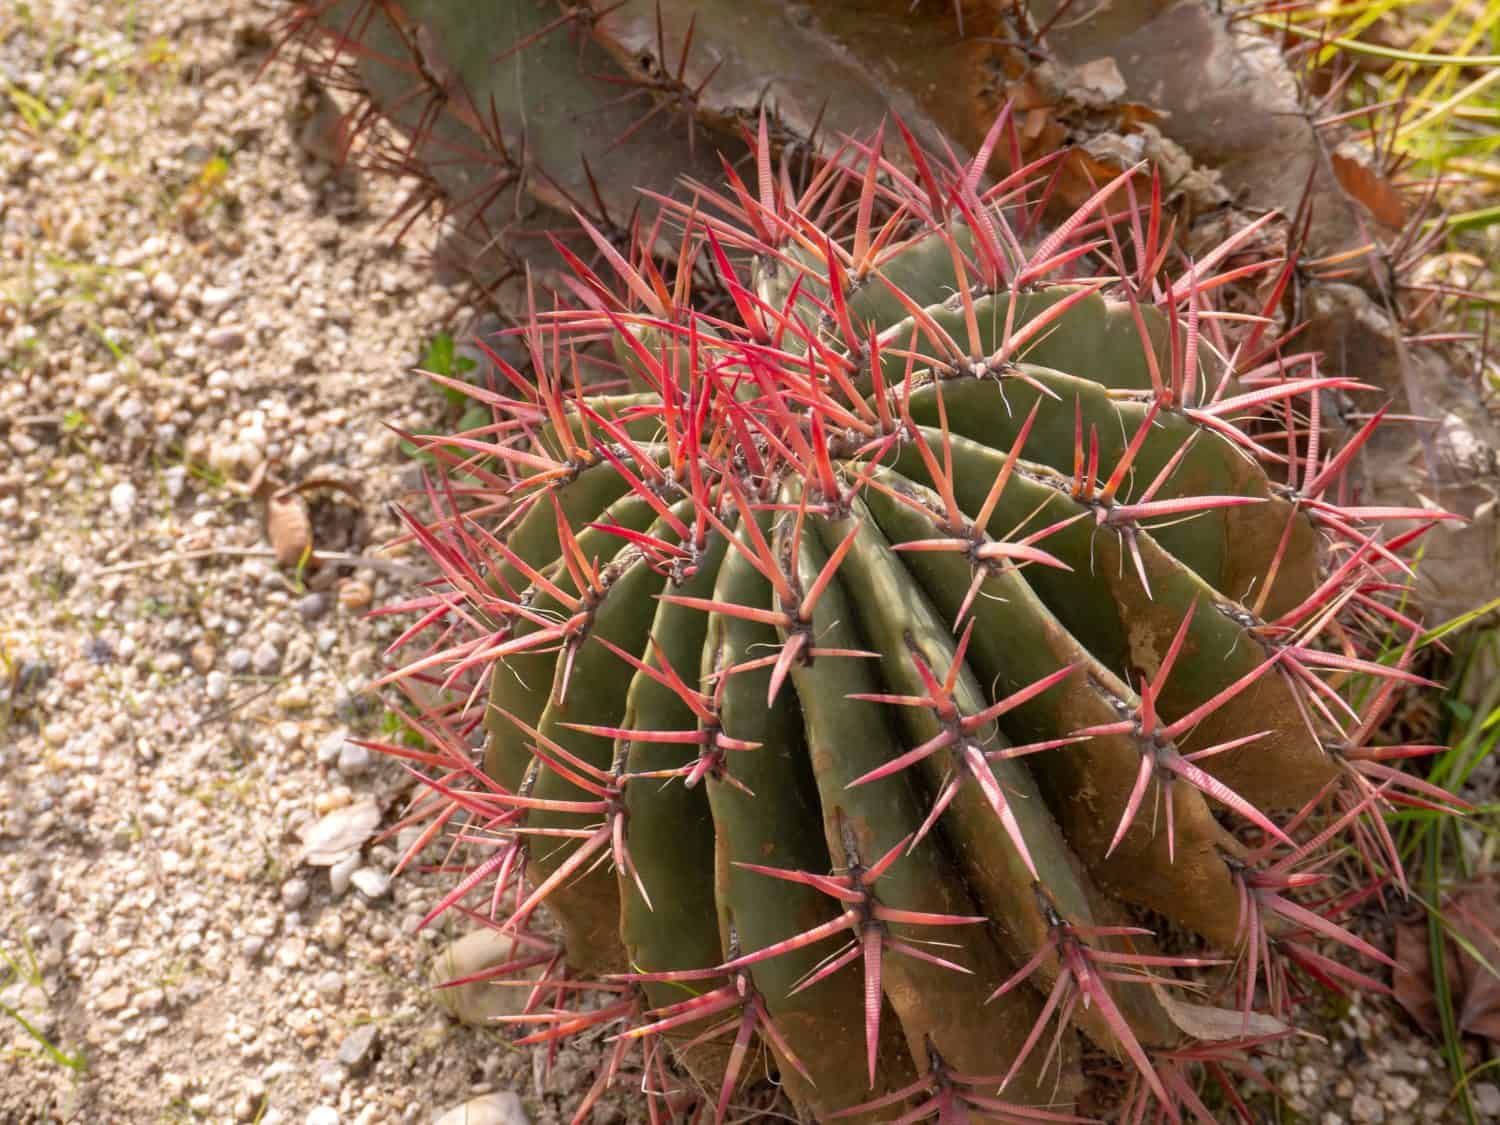 Mexican Fire Barrel Cactus or ferocactus pringlei succulent plant with bright red spines